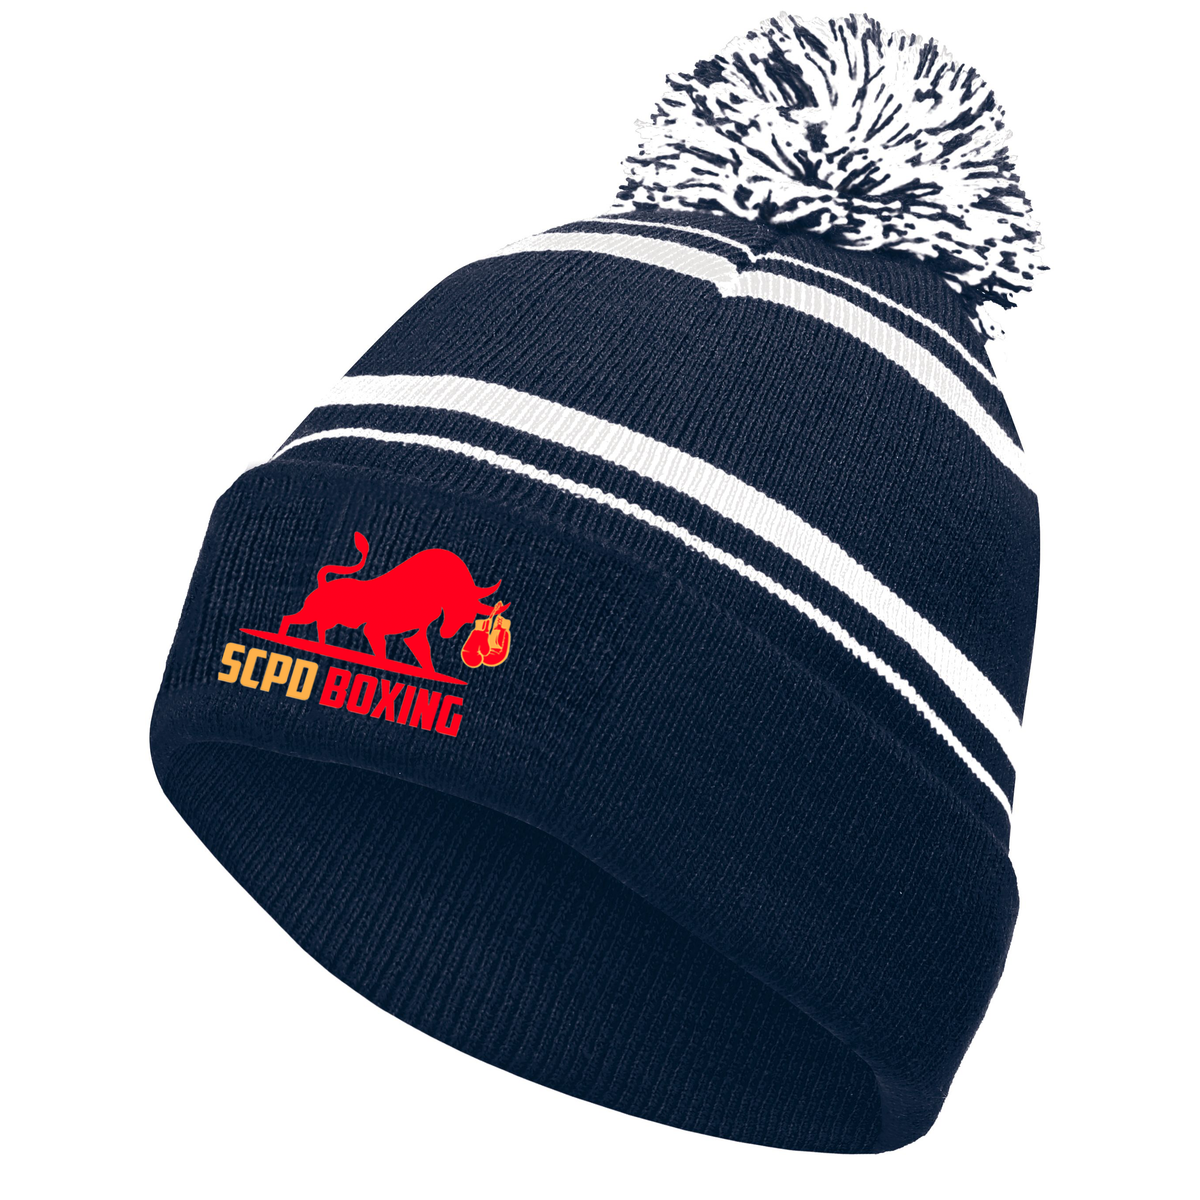 SCPD Boxing Homecoming Beanie